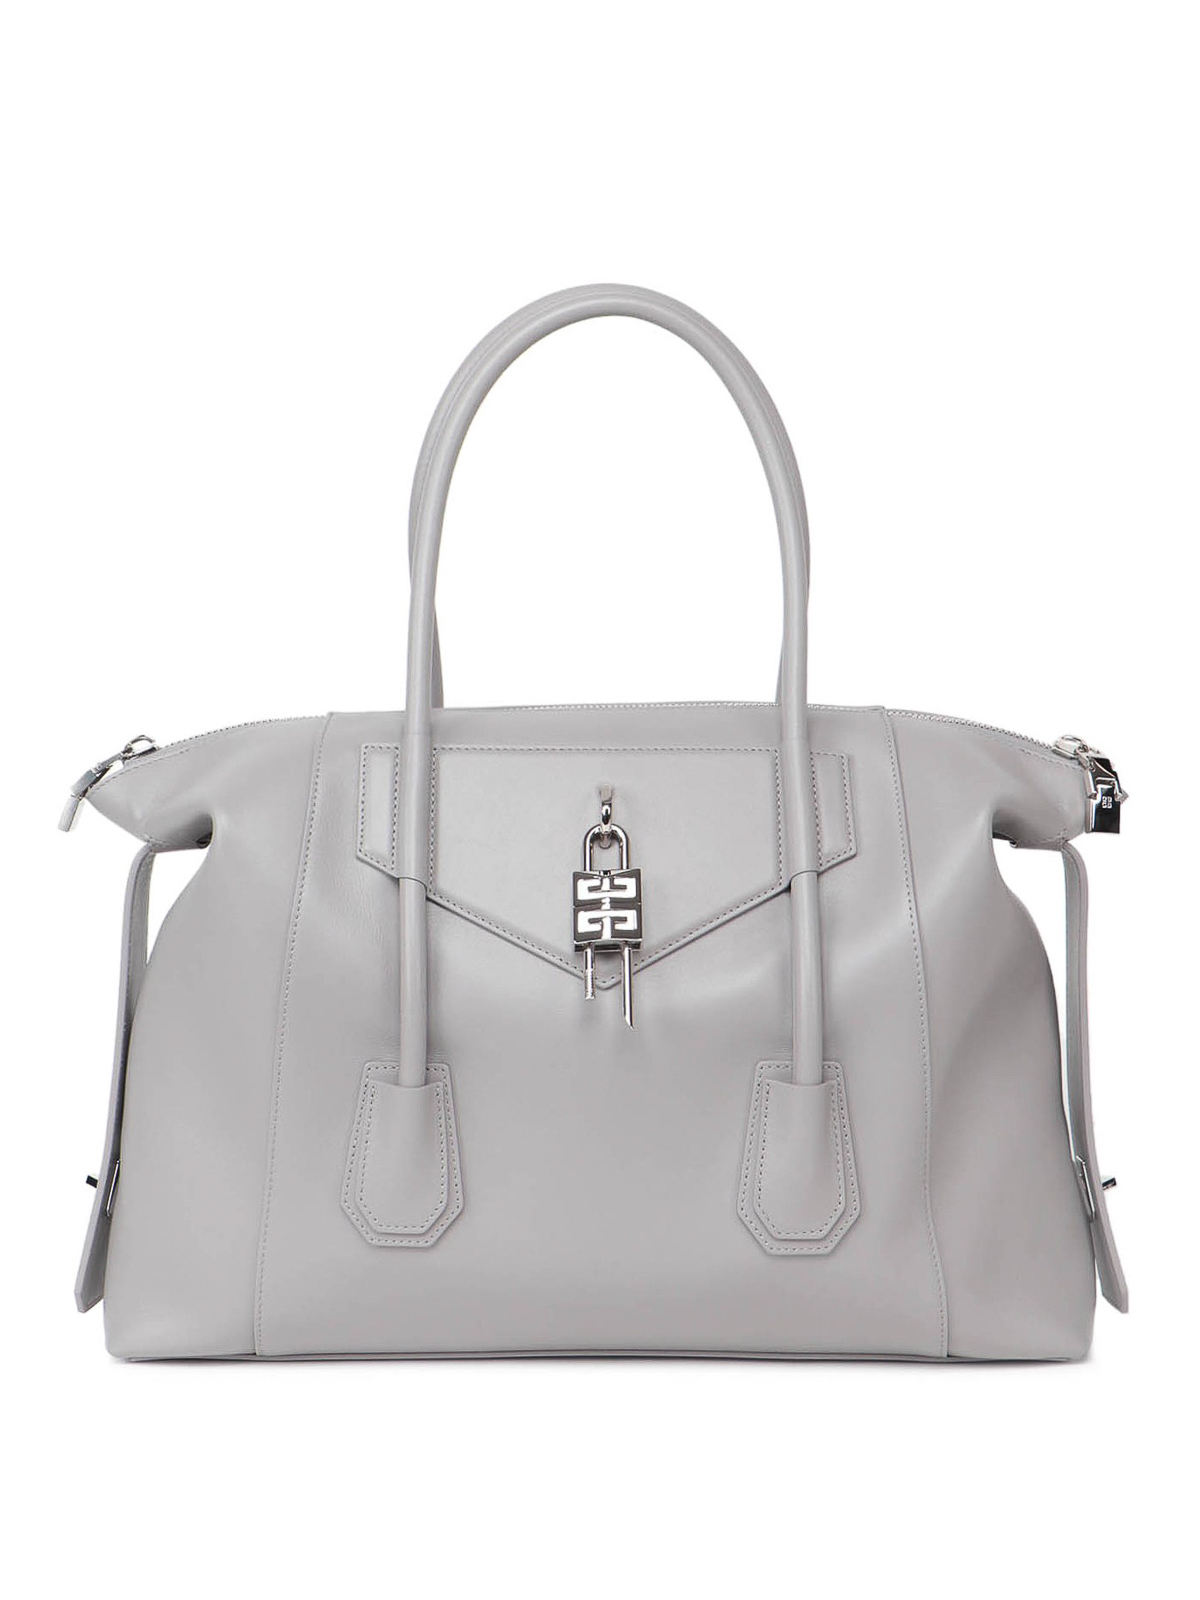 Givenchy Bags for Women